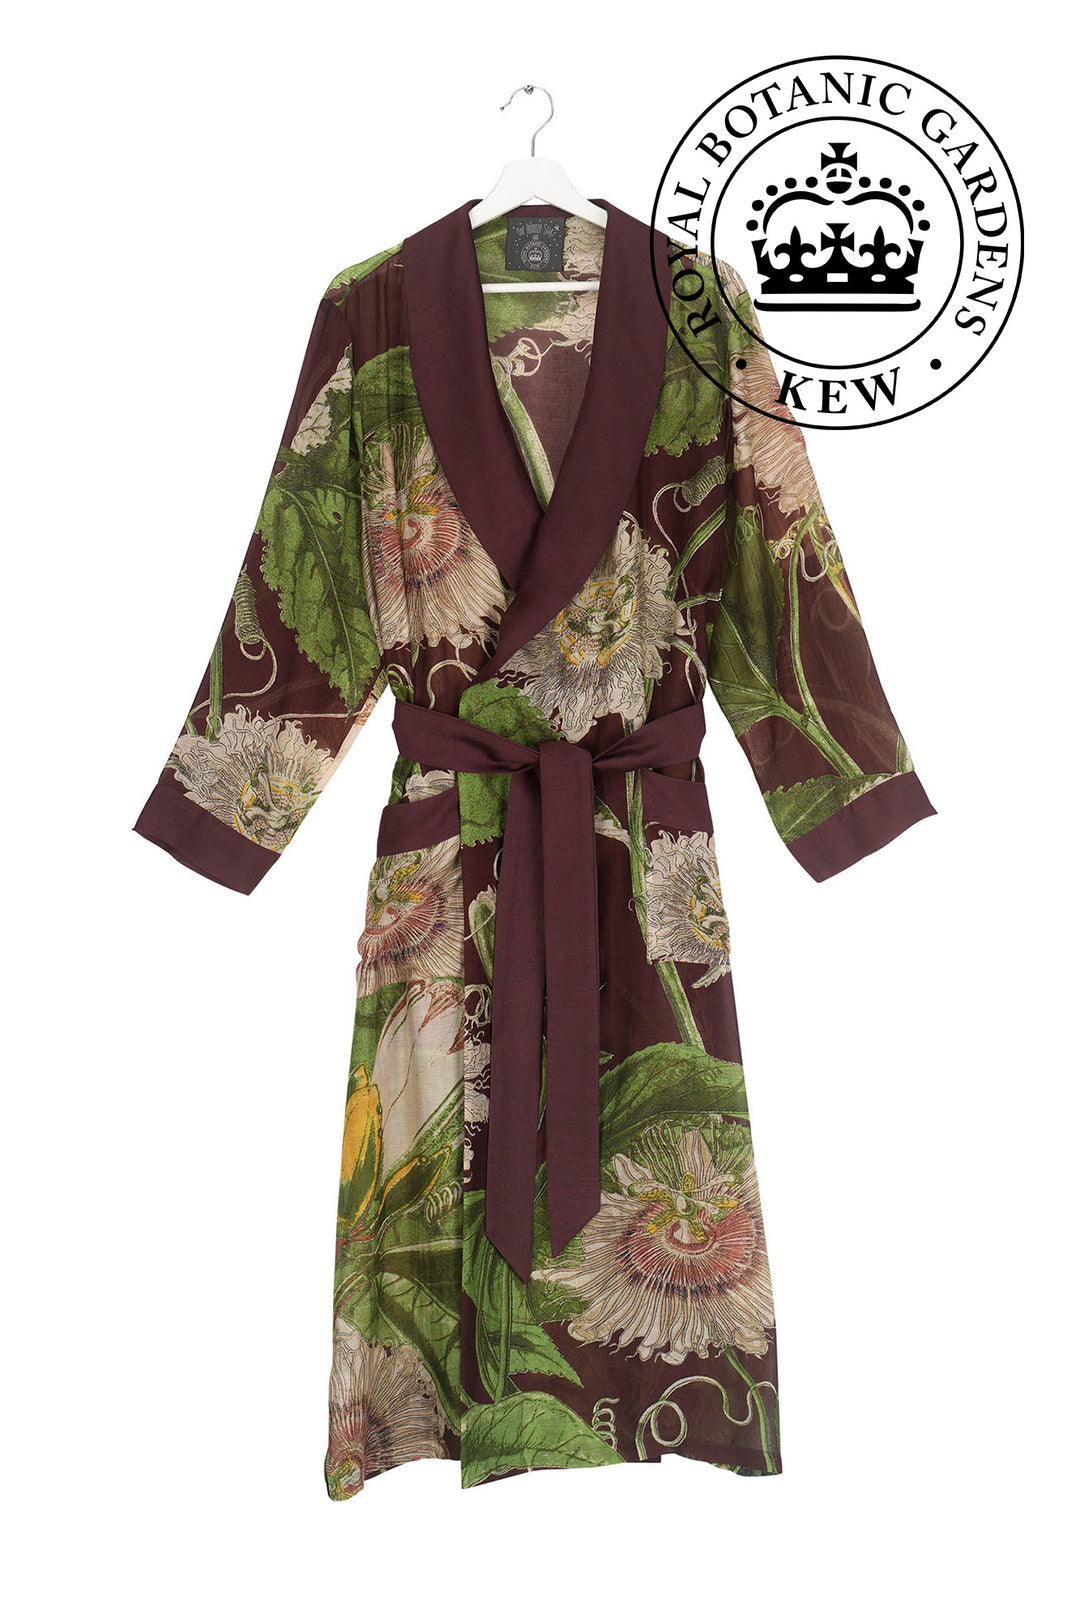 KEW Passion Flower Burgundy Gown- This gown is perfect as a luxurious house coat or for layering as a chic accessory to your favourite outfit.